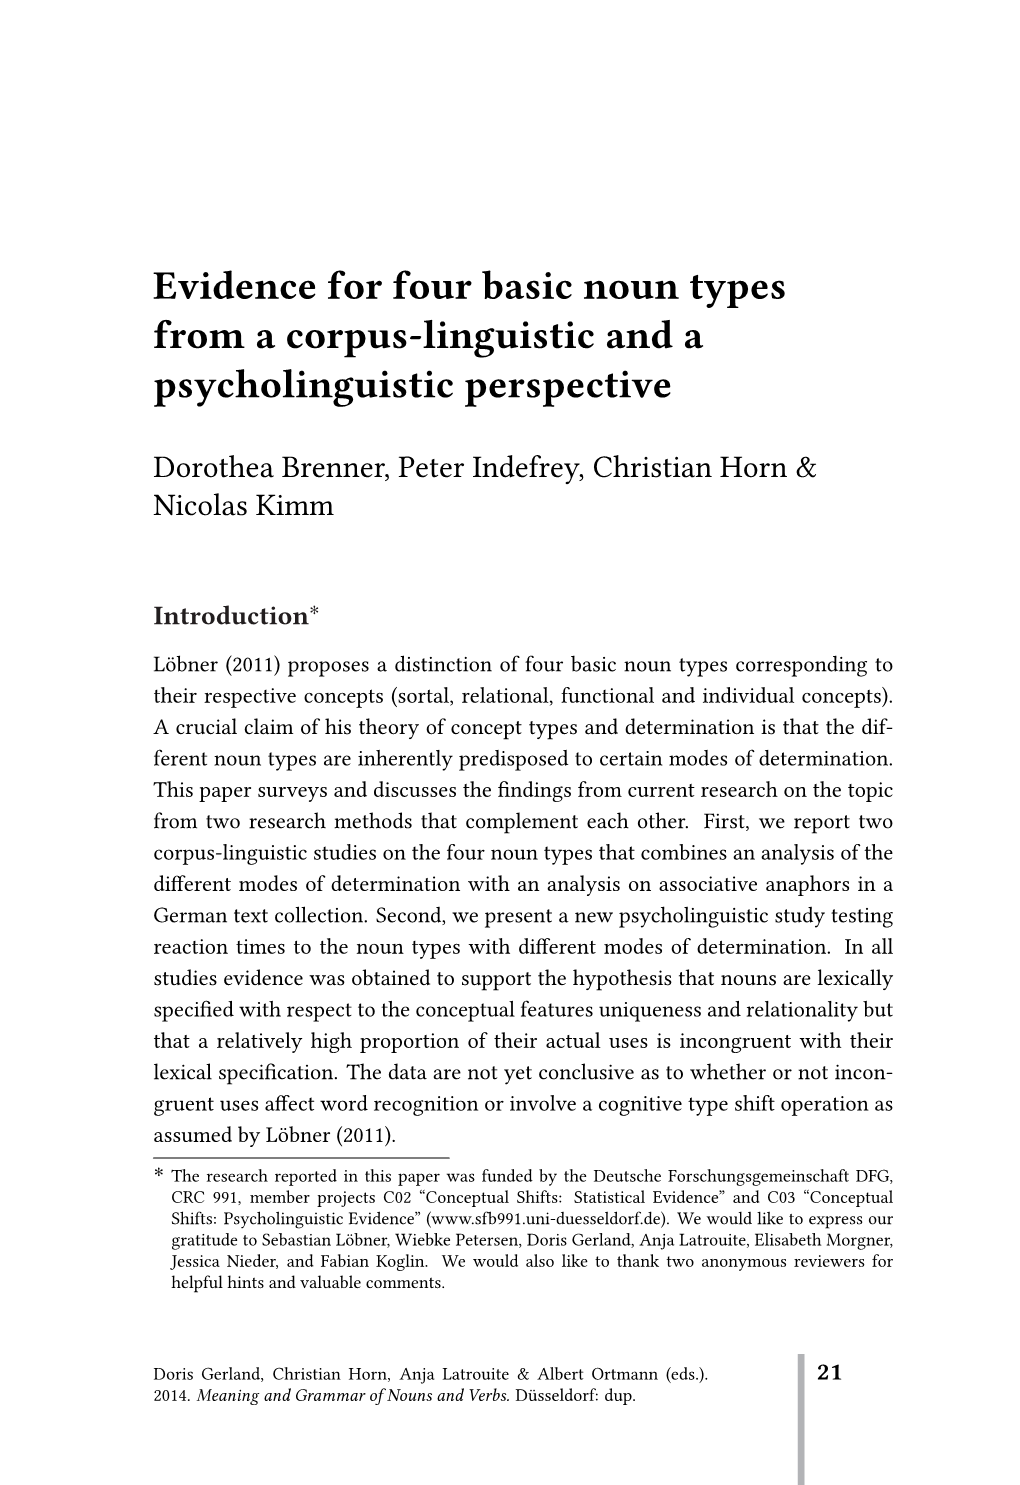 Evidence for Four Basic Noun Types from a Corpus-Linguistic and a Psycholinguistic Perspective